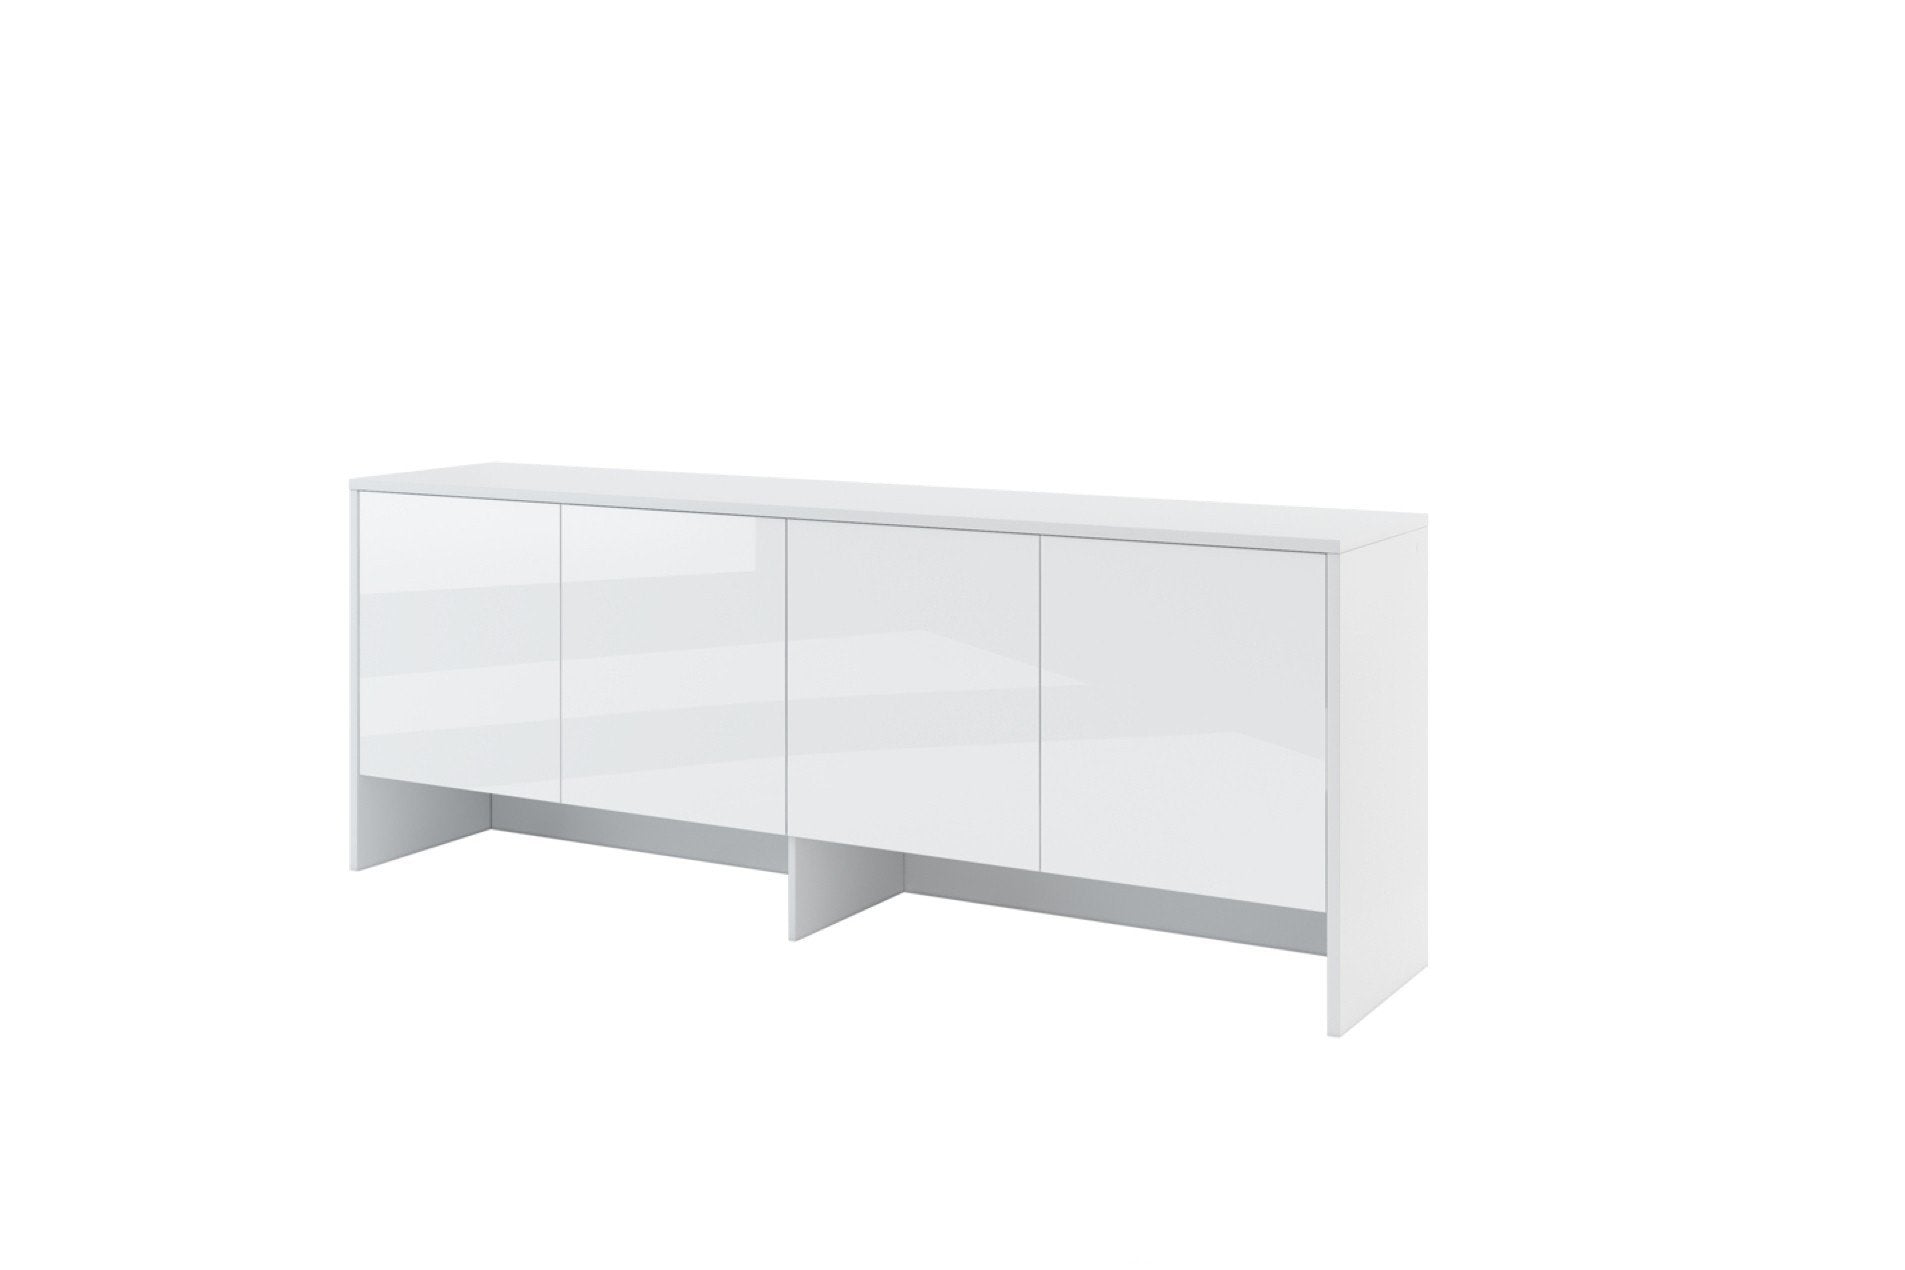 BC-10 Over Bed Unit for Horizontal Wall Bed Concept 120cm White Gloss Wall Bed with Storage Unit 